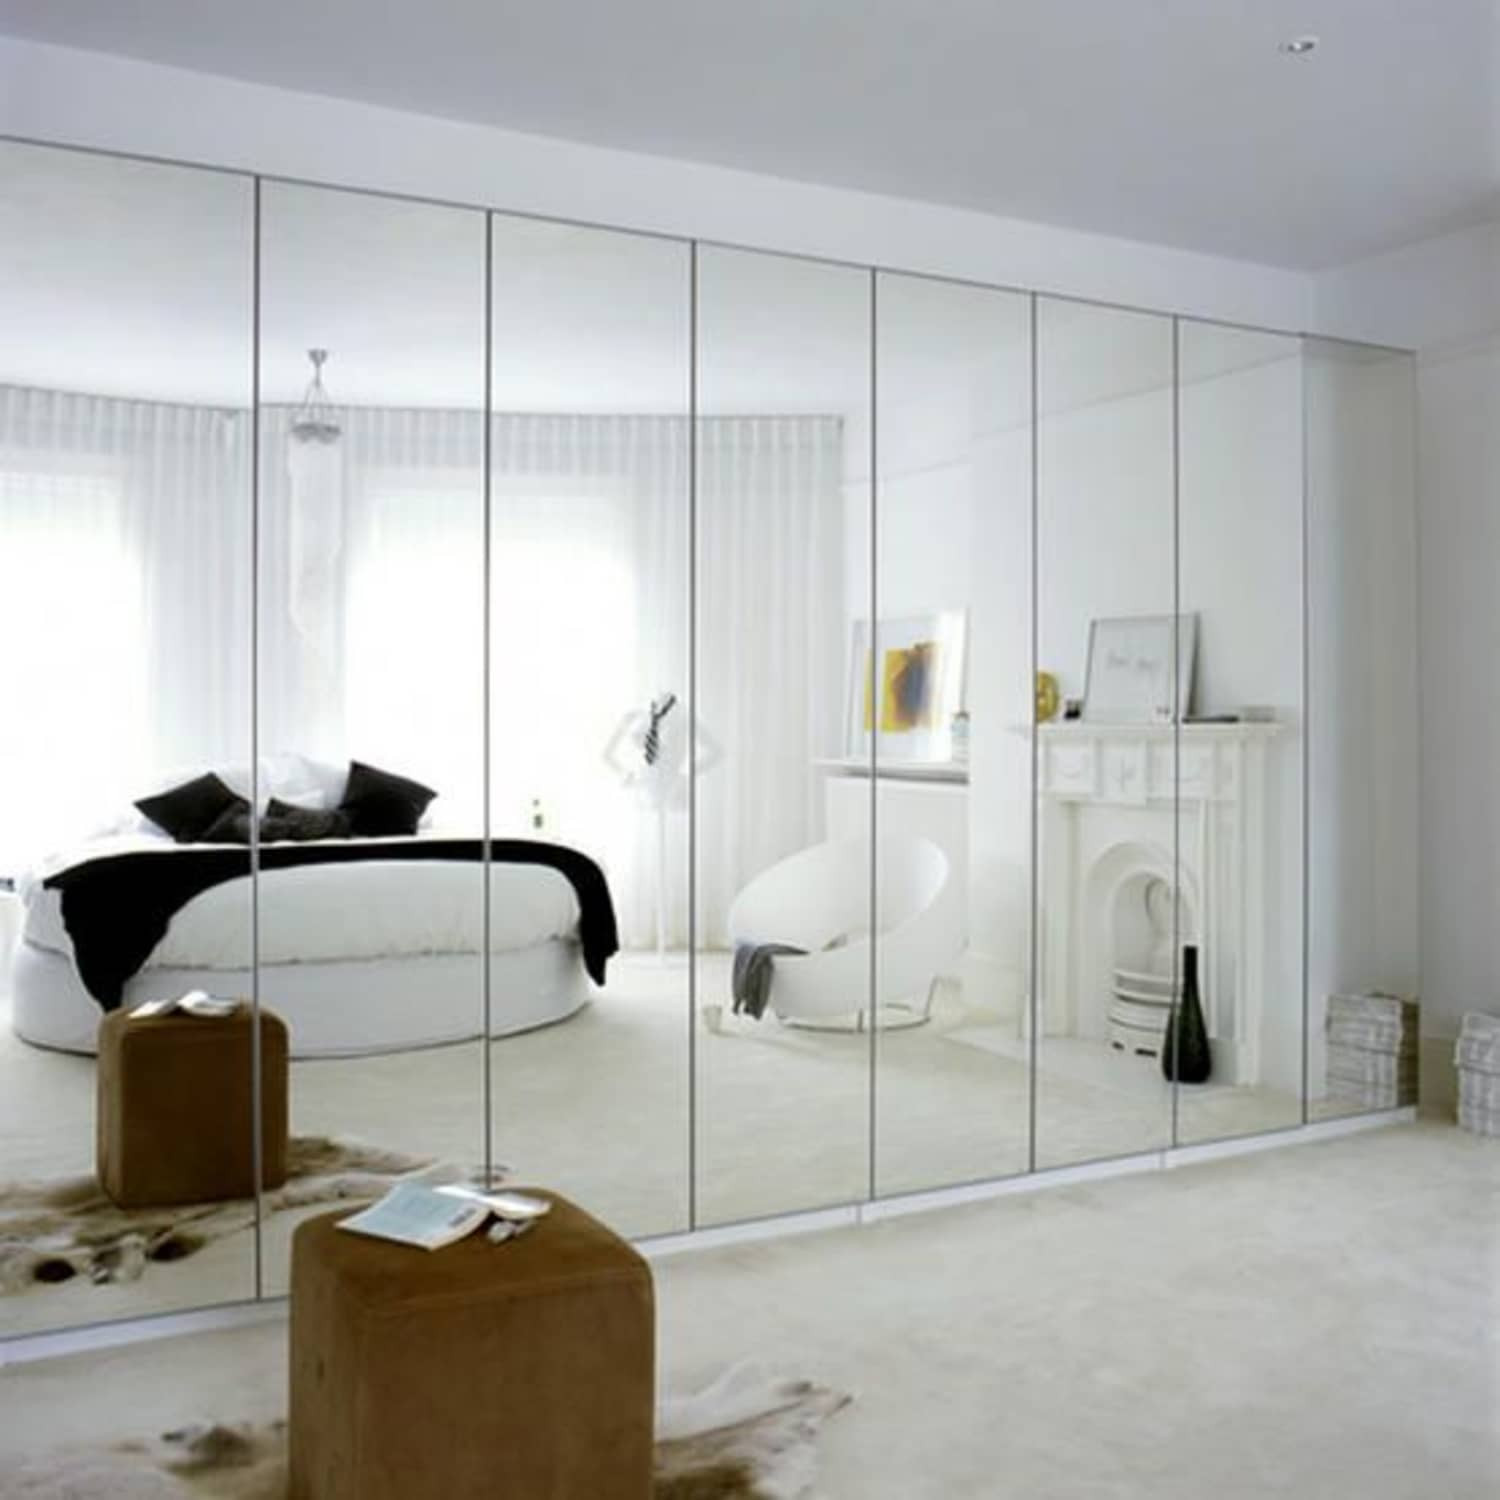 Wall Mirror For Bedroom
 Plagued With Dated Mirrored Walls 5 Design Ideas to Make